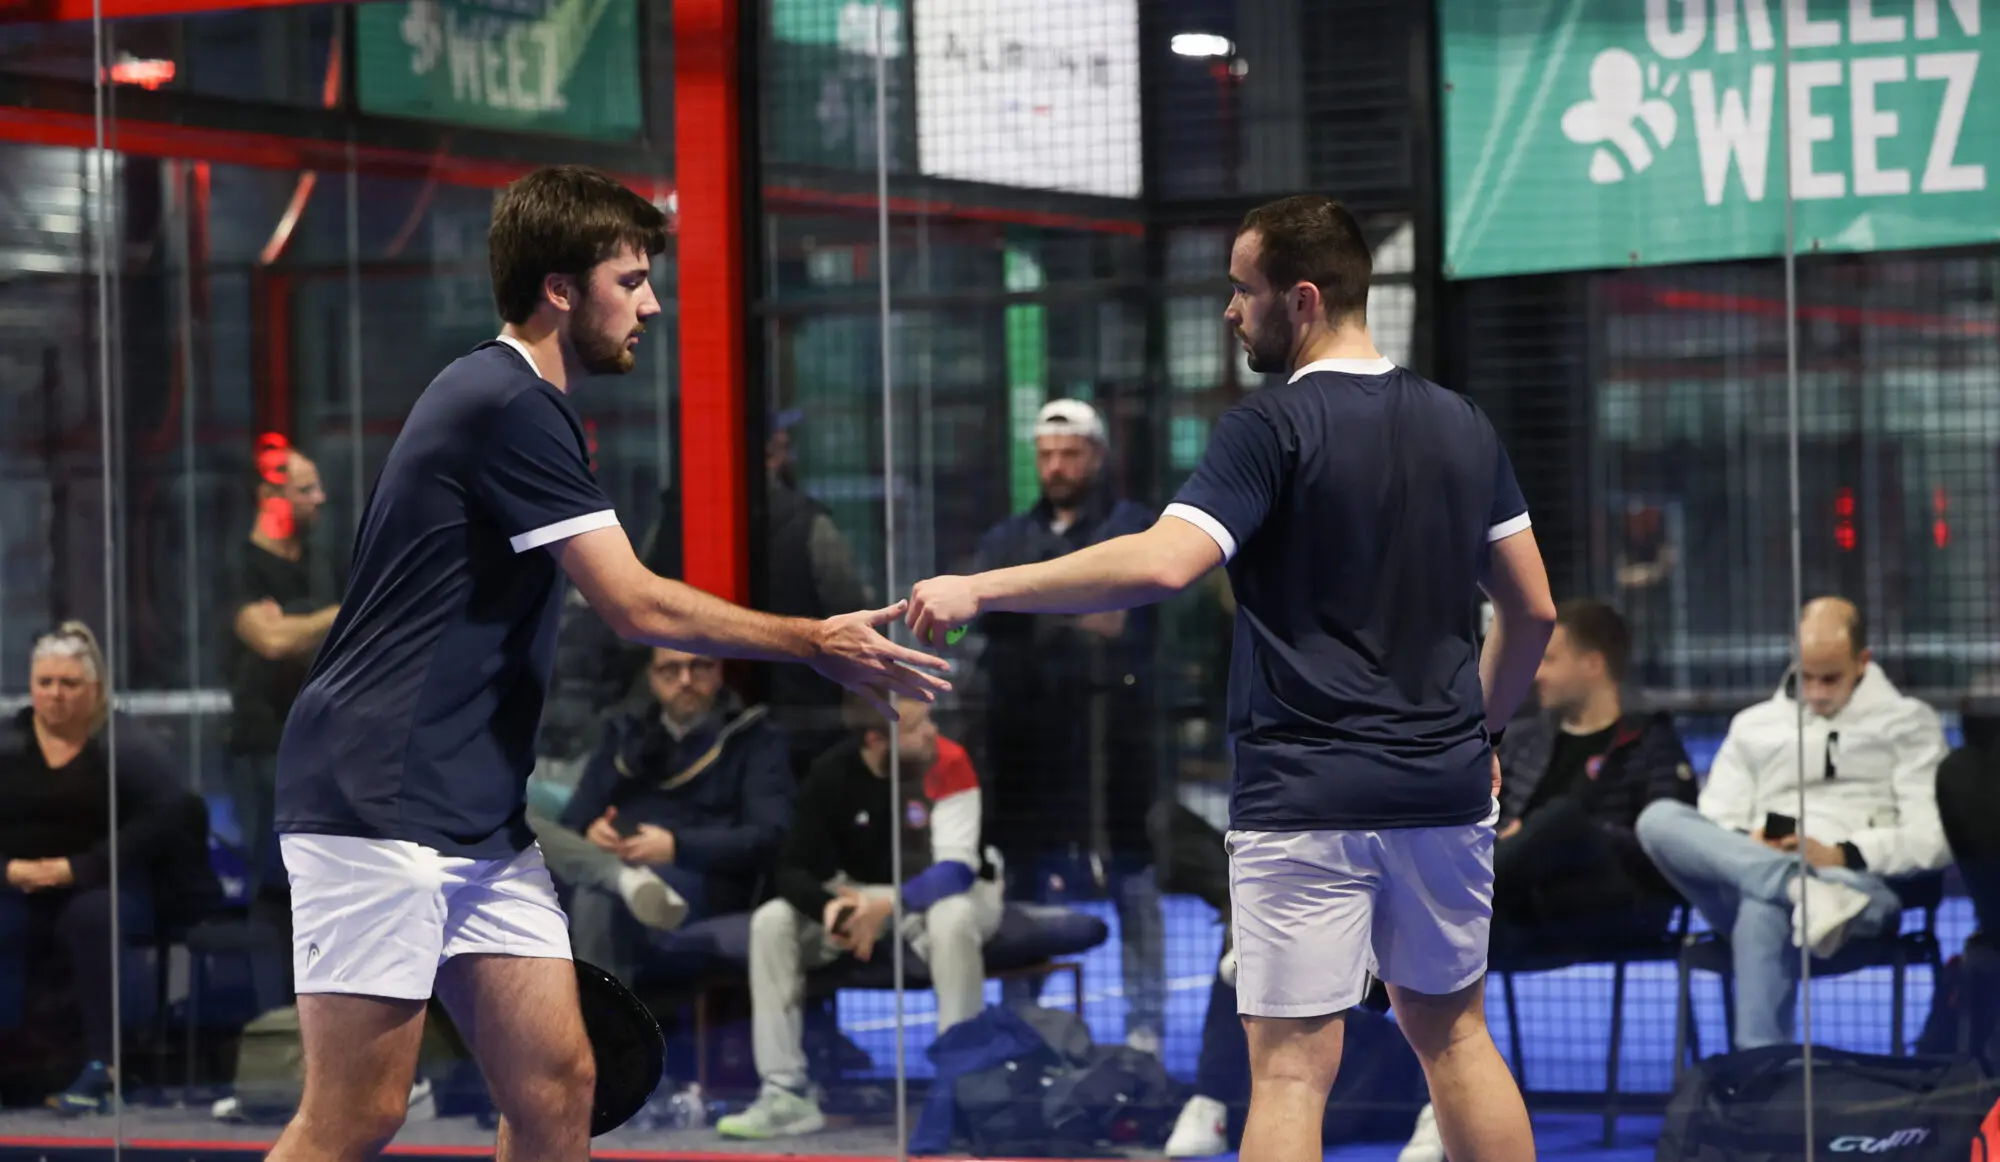 Toulouse Padel Club shook: Blanqué / Guichard saves 2 match points…